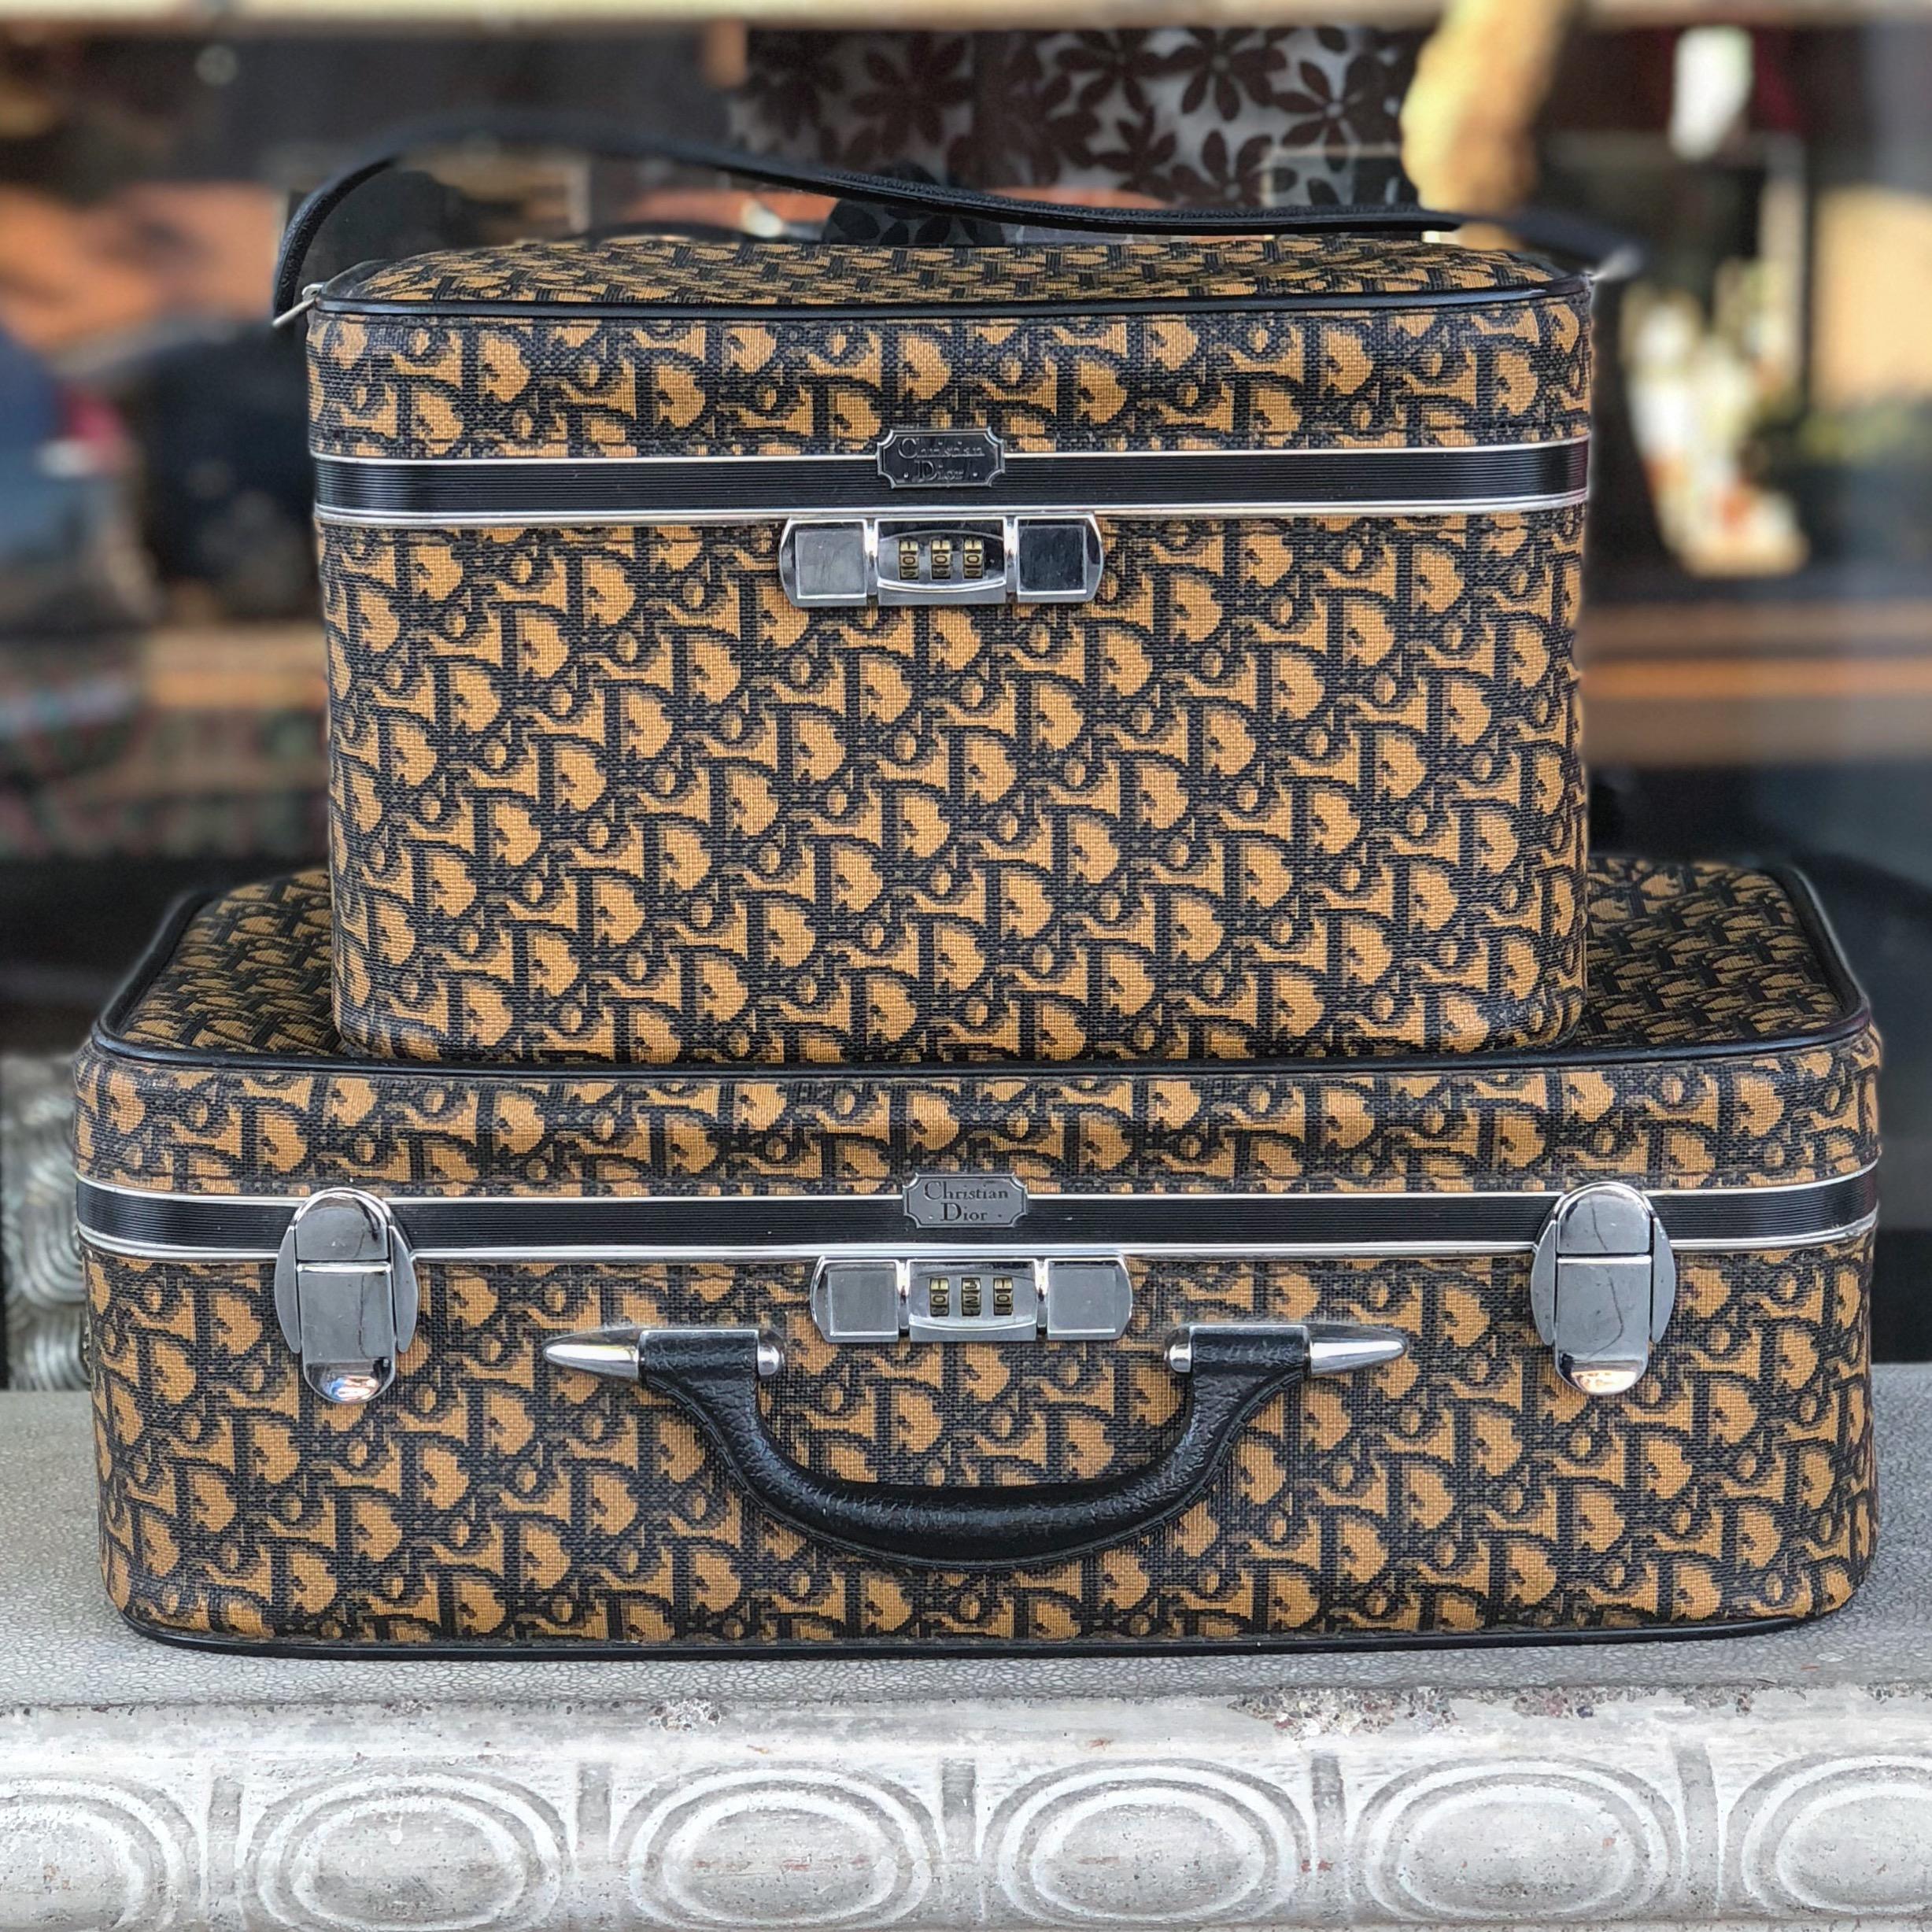 An incredibly rare and collectible piece of Christian Dior monogram luggage dating to the 1970s. This beautiful piece was designed as a carry-on style and absolutely epitomises the glamour and excess of 1970s luxury travel. An amazing find for any